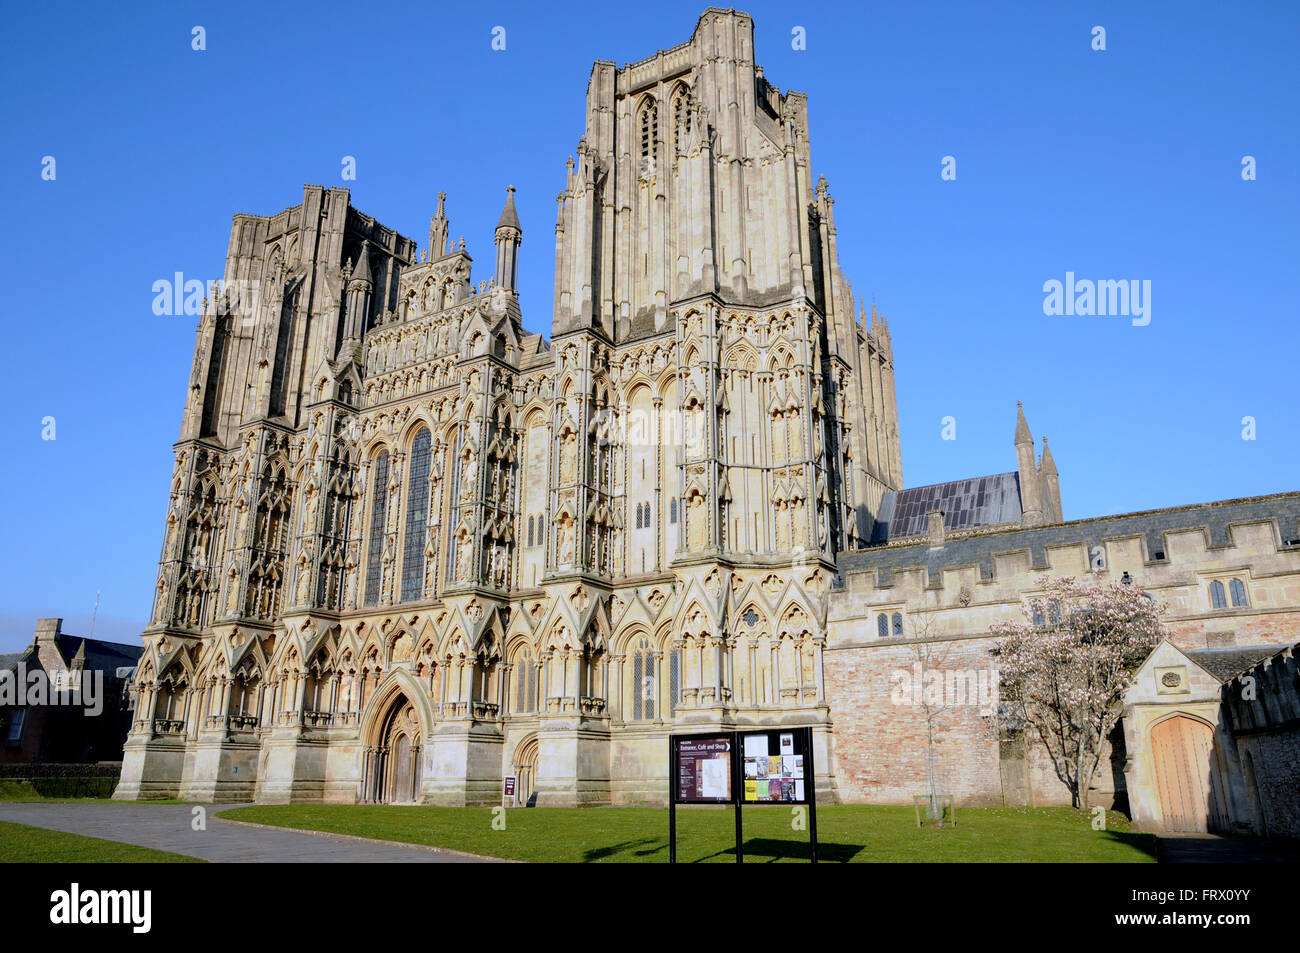 Wells Cathedral in the Englisg county of Somerset. The present cathedral dates from about 1175 and is built in the Gothic style. Stock Photo